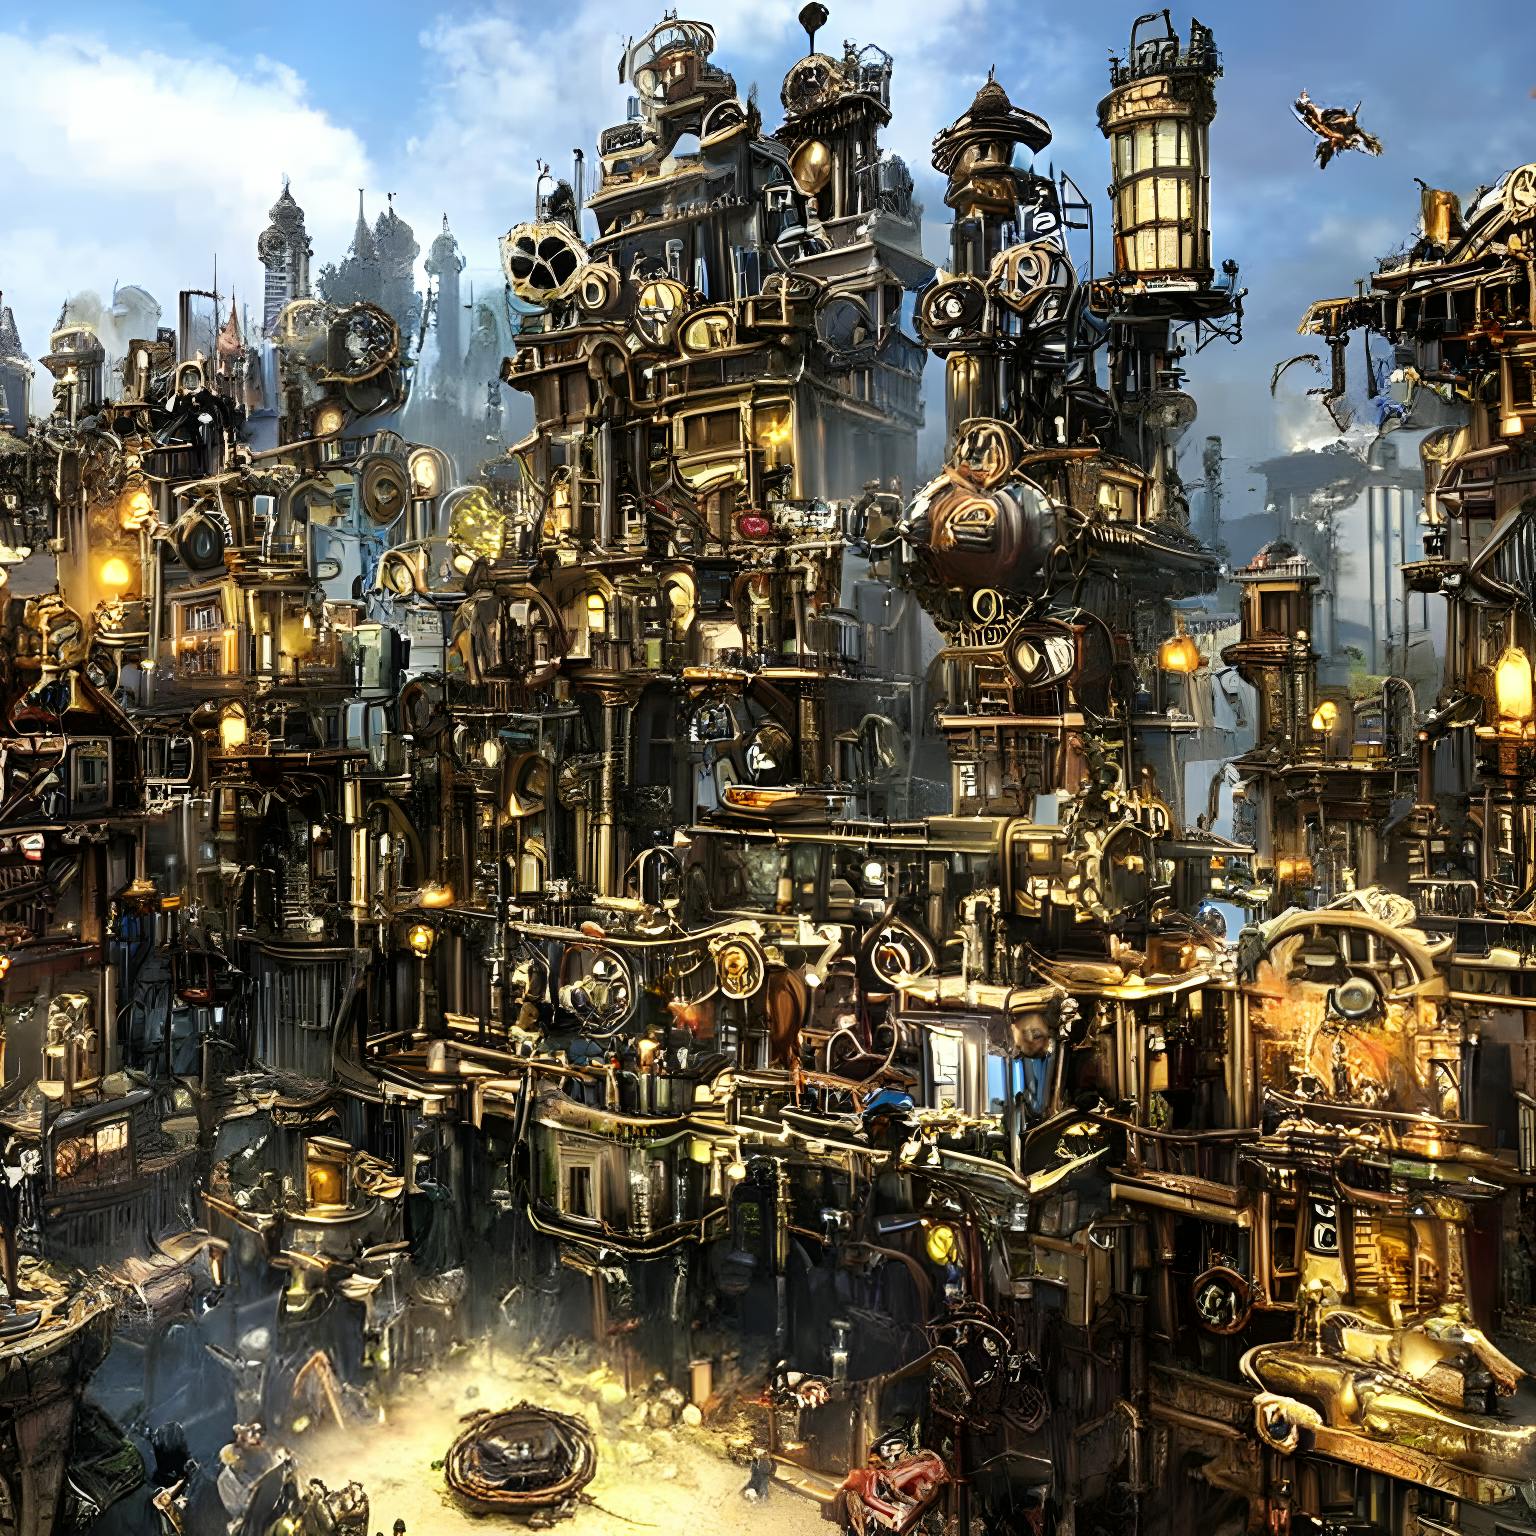 https://hackernoon.imgix.net/images/build-a-steampunk-world-clfjet5i0000001s60fjhfb26.png